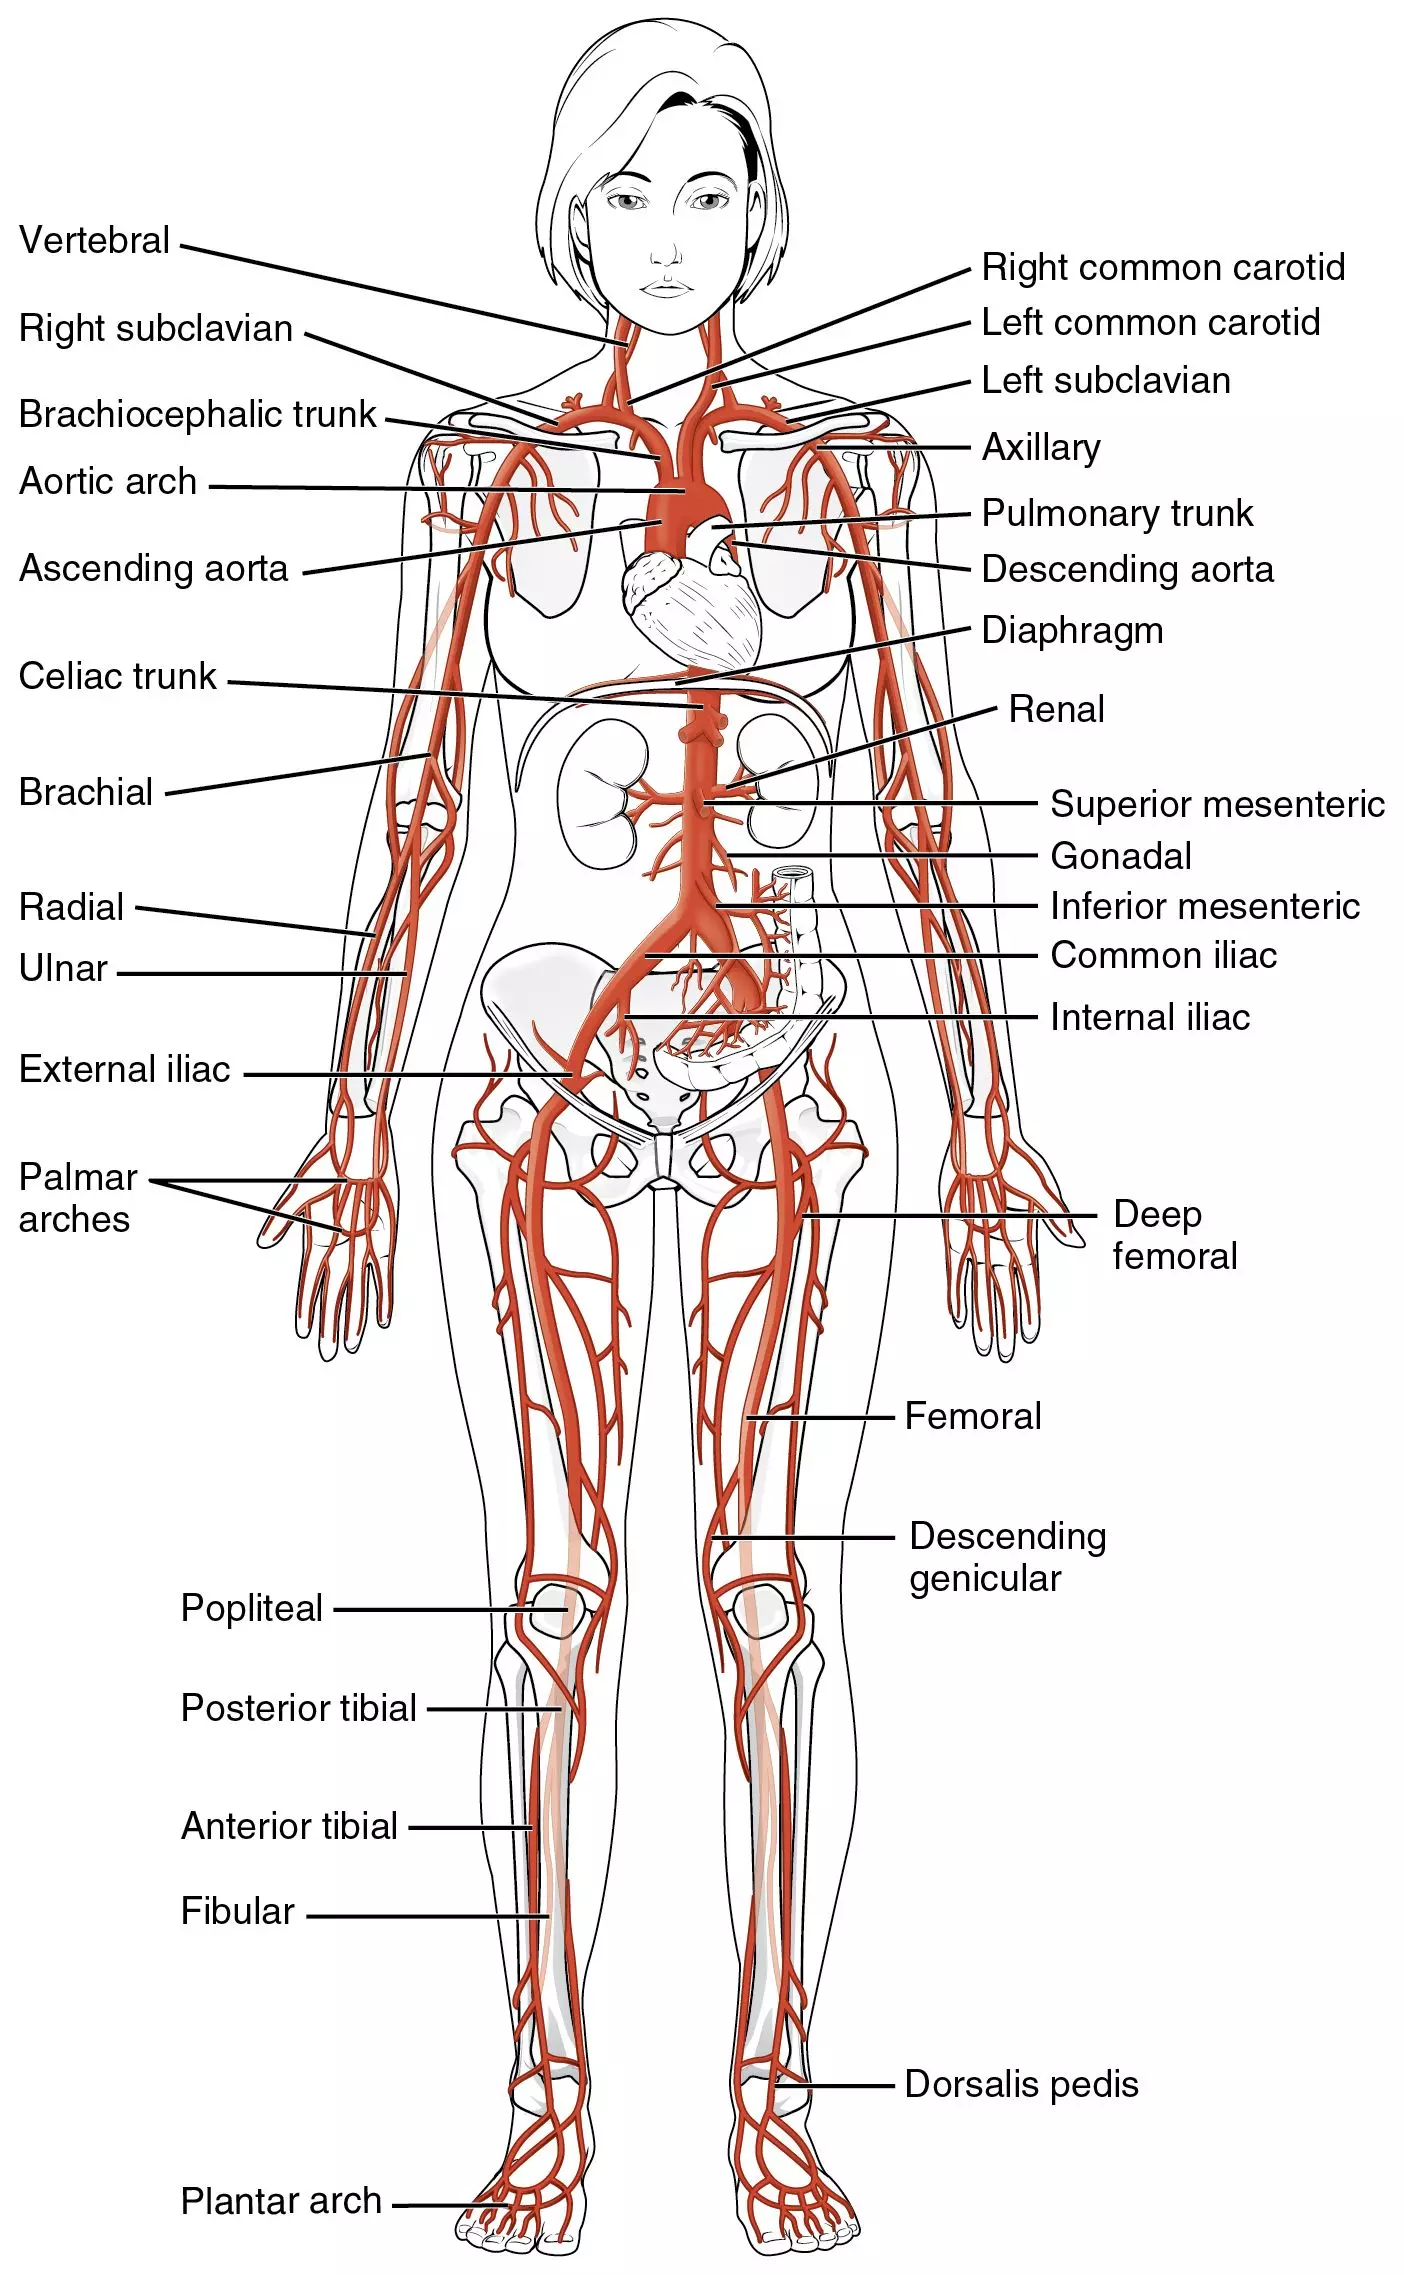 Major Systemic Arteries of the body SimpleMed